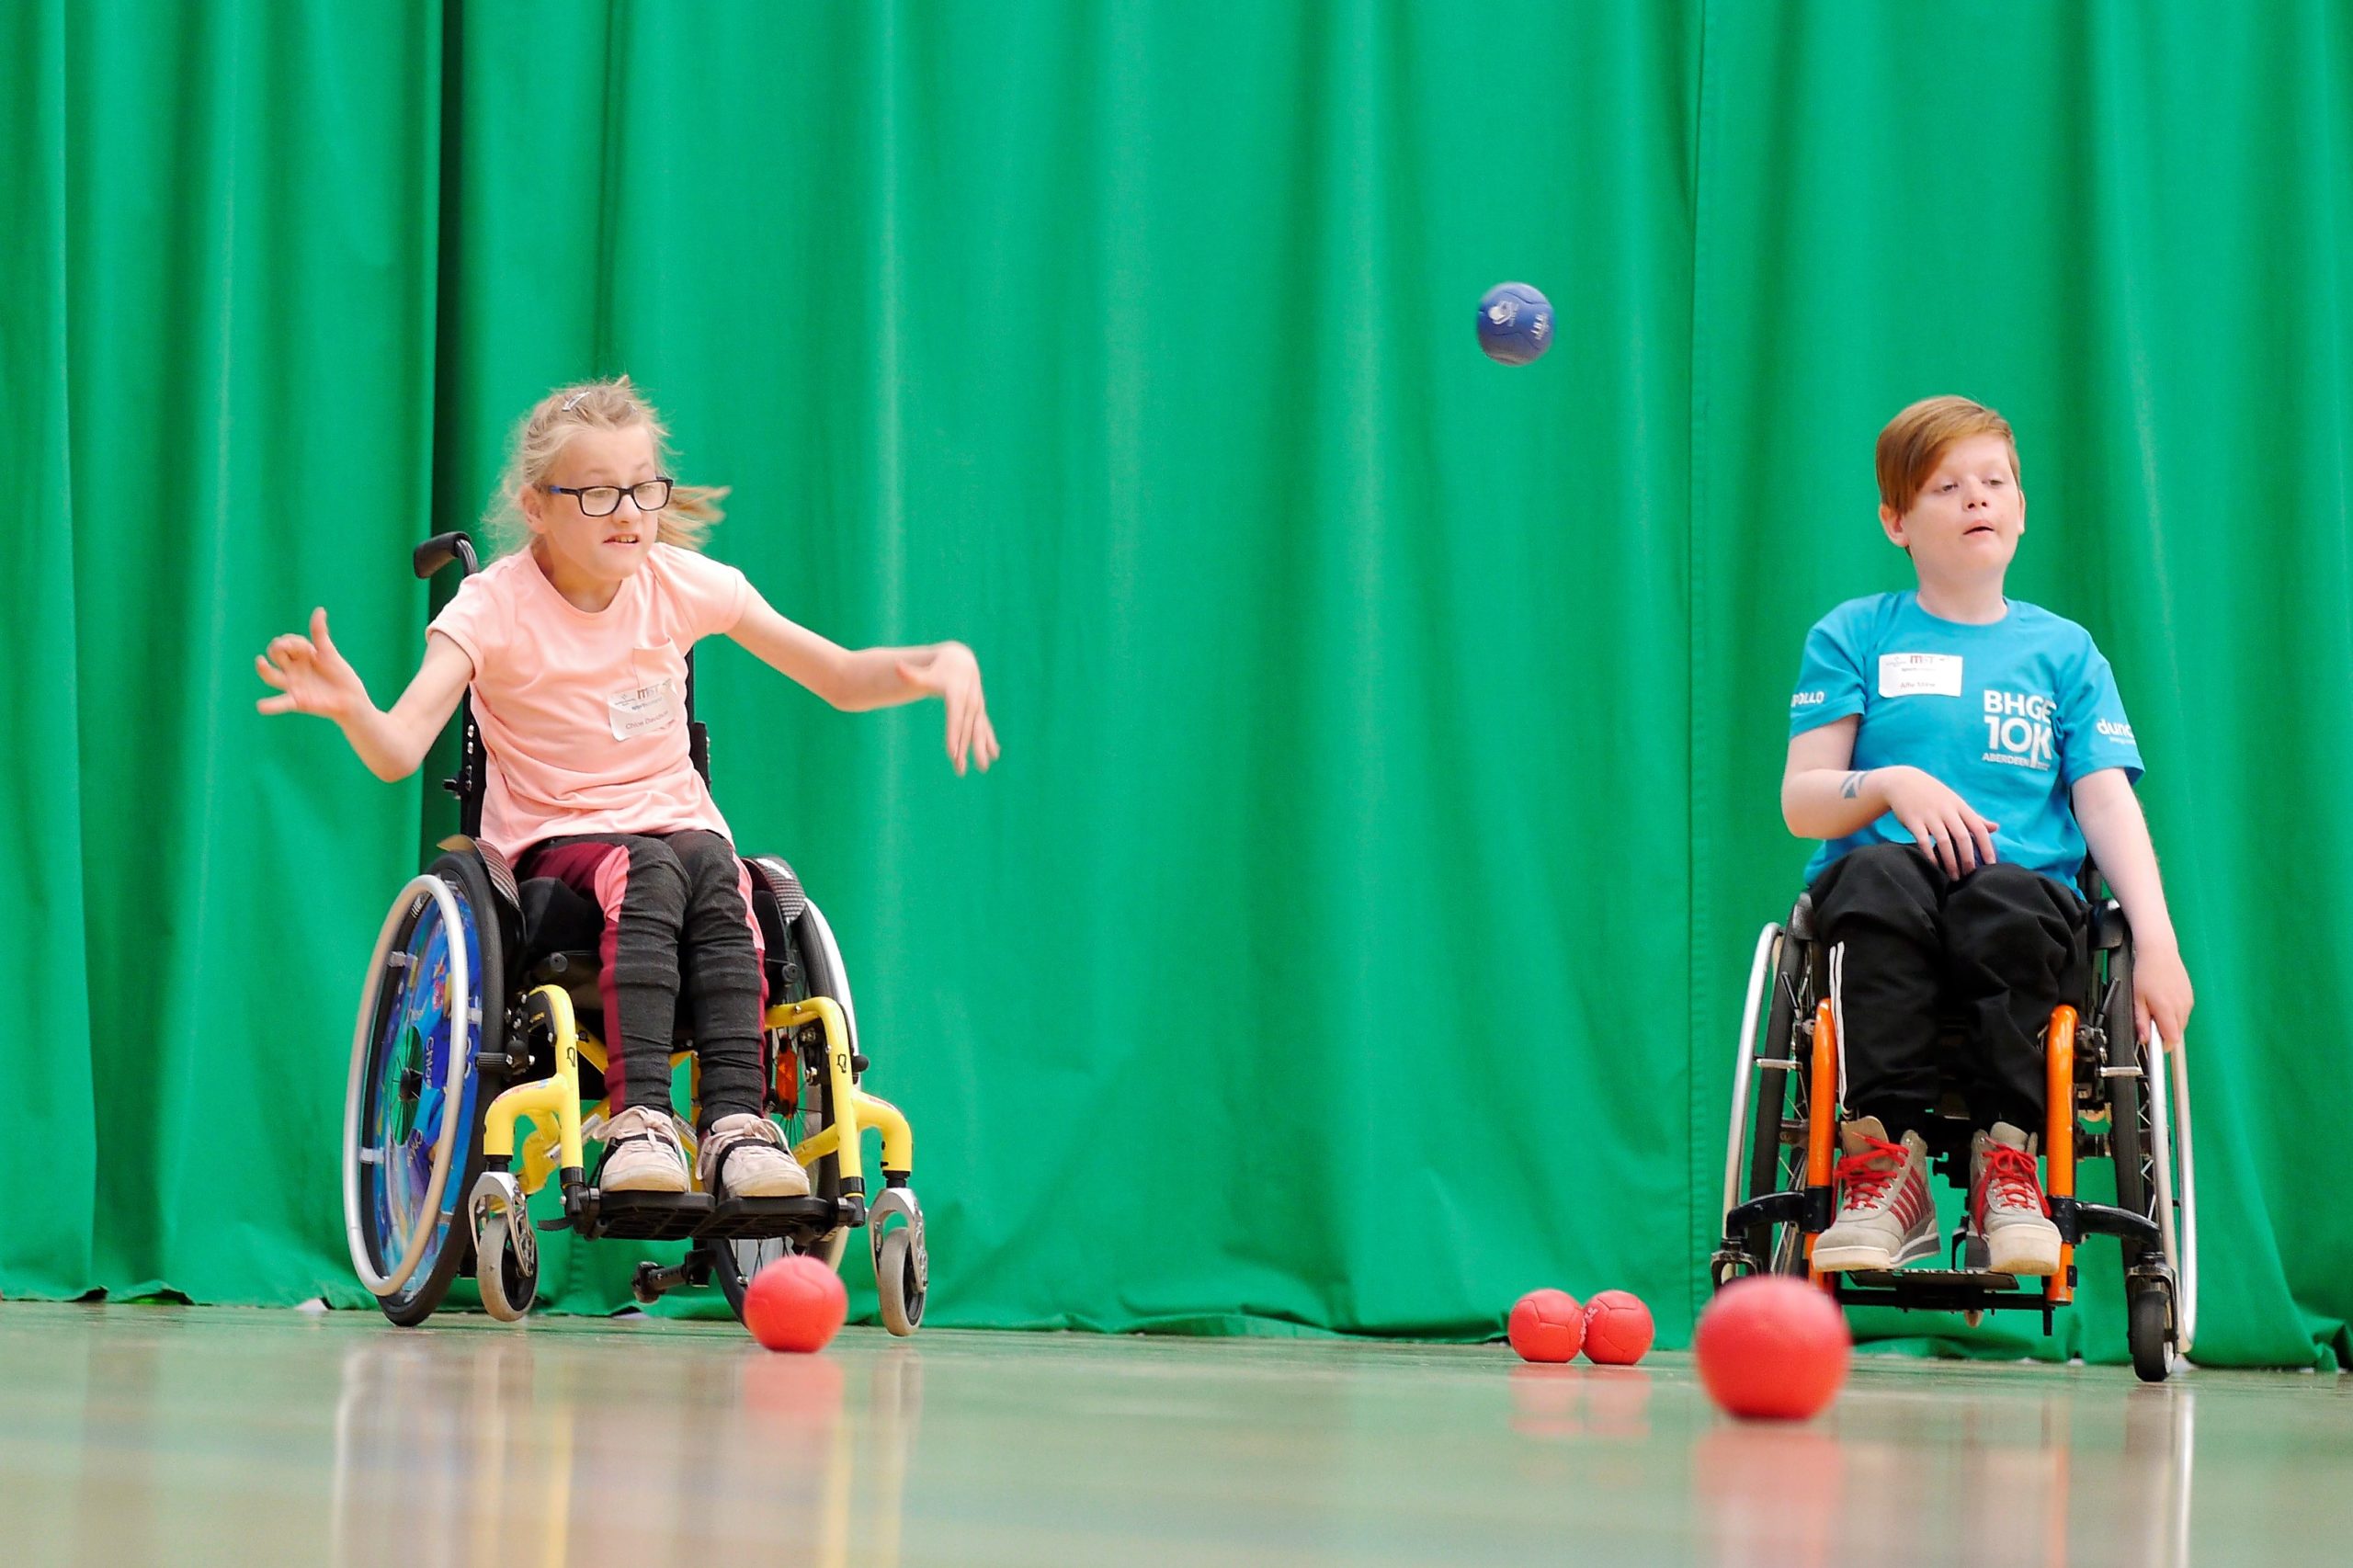 Two children playing boccia. One child is in action throwing the blue ball.